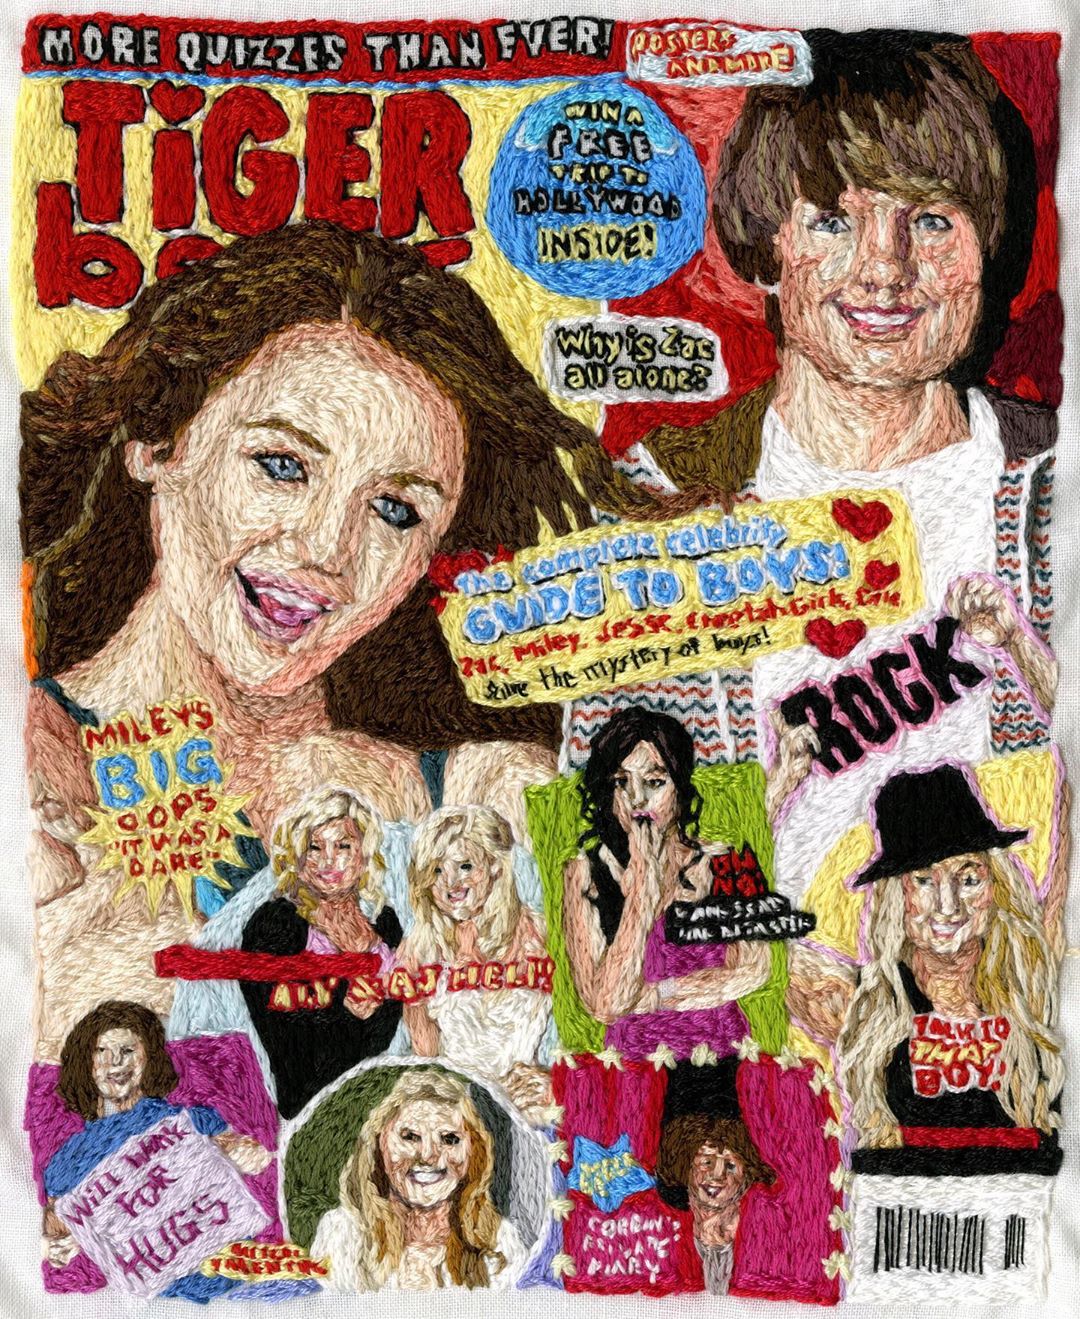 Embroidery art of Tiger Beat from the mid 200s